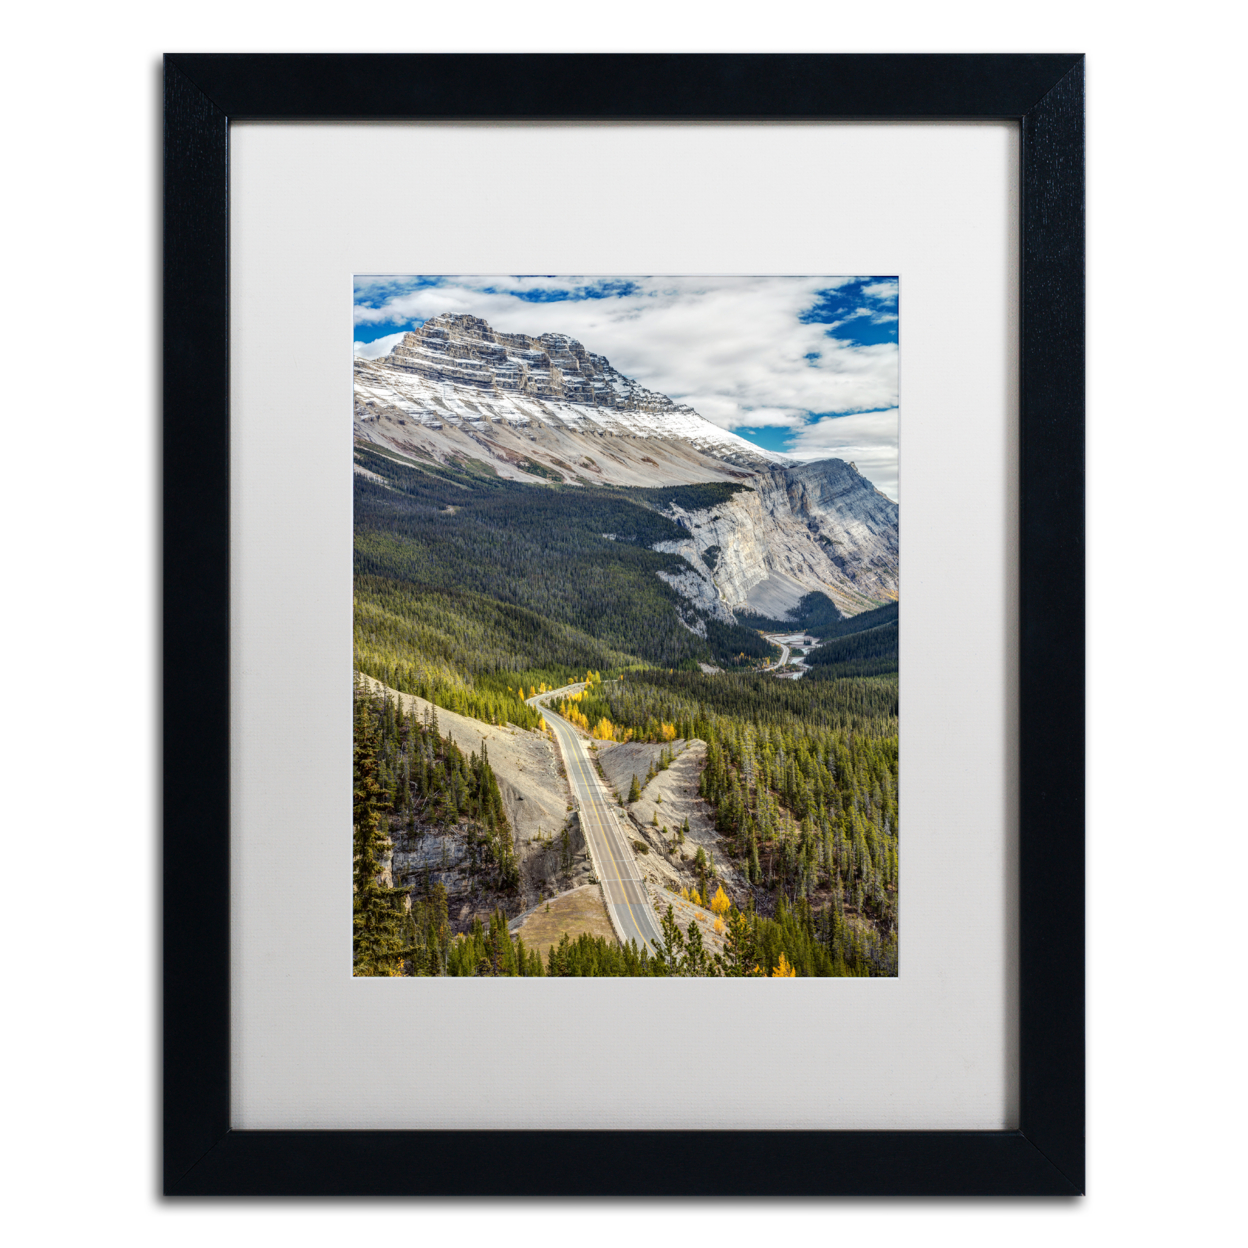 Pierre Leclerc 'Icefield Parkway' Black Wooden Framed Art 18 X 22 Inches